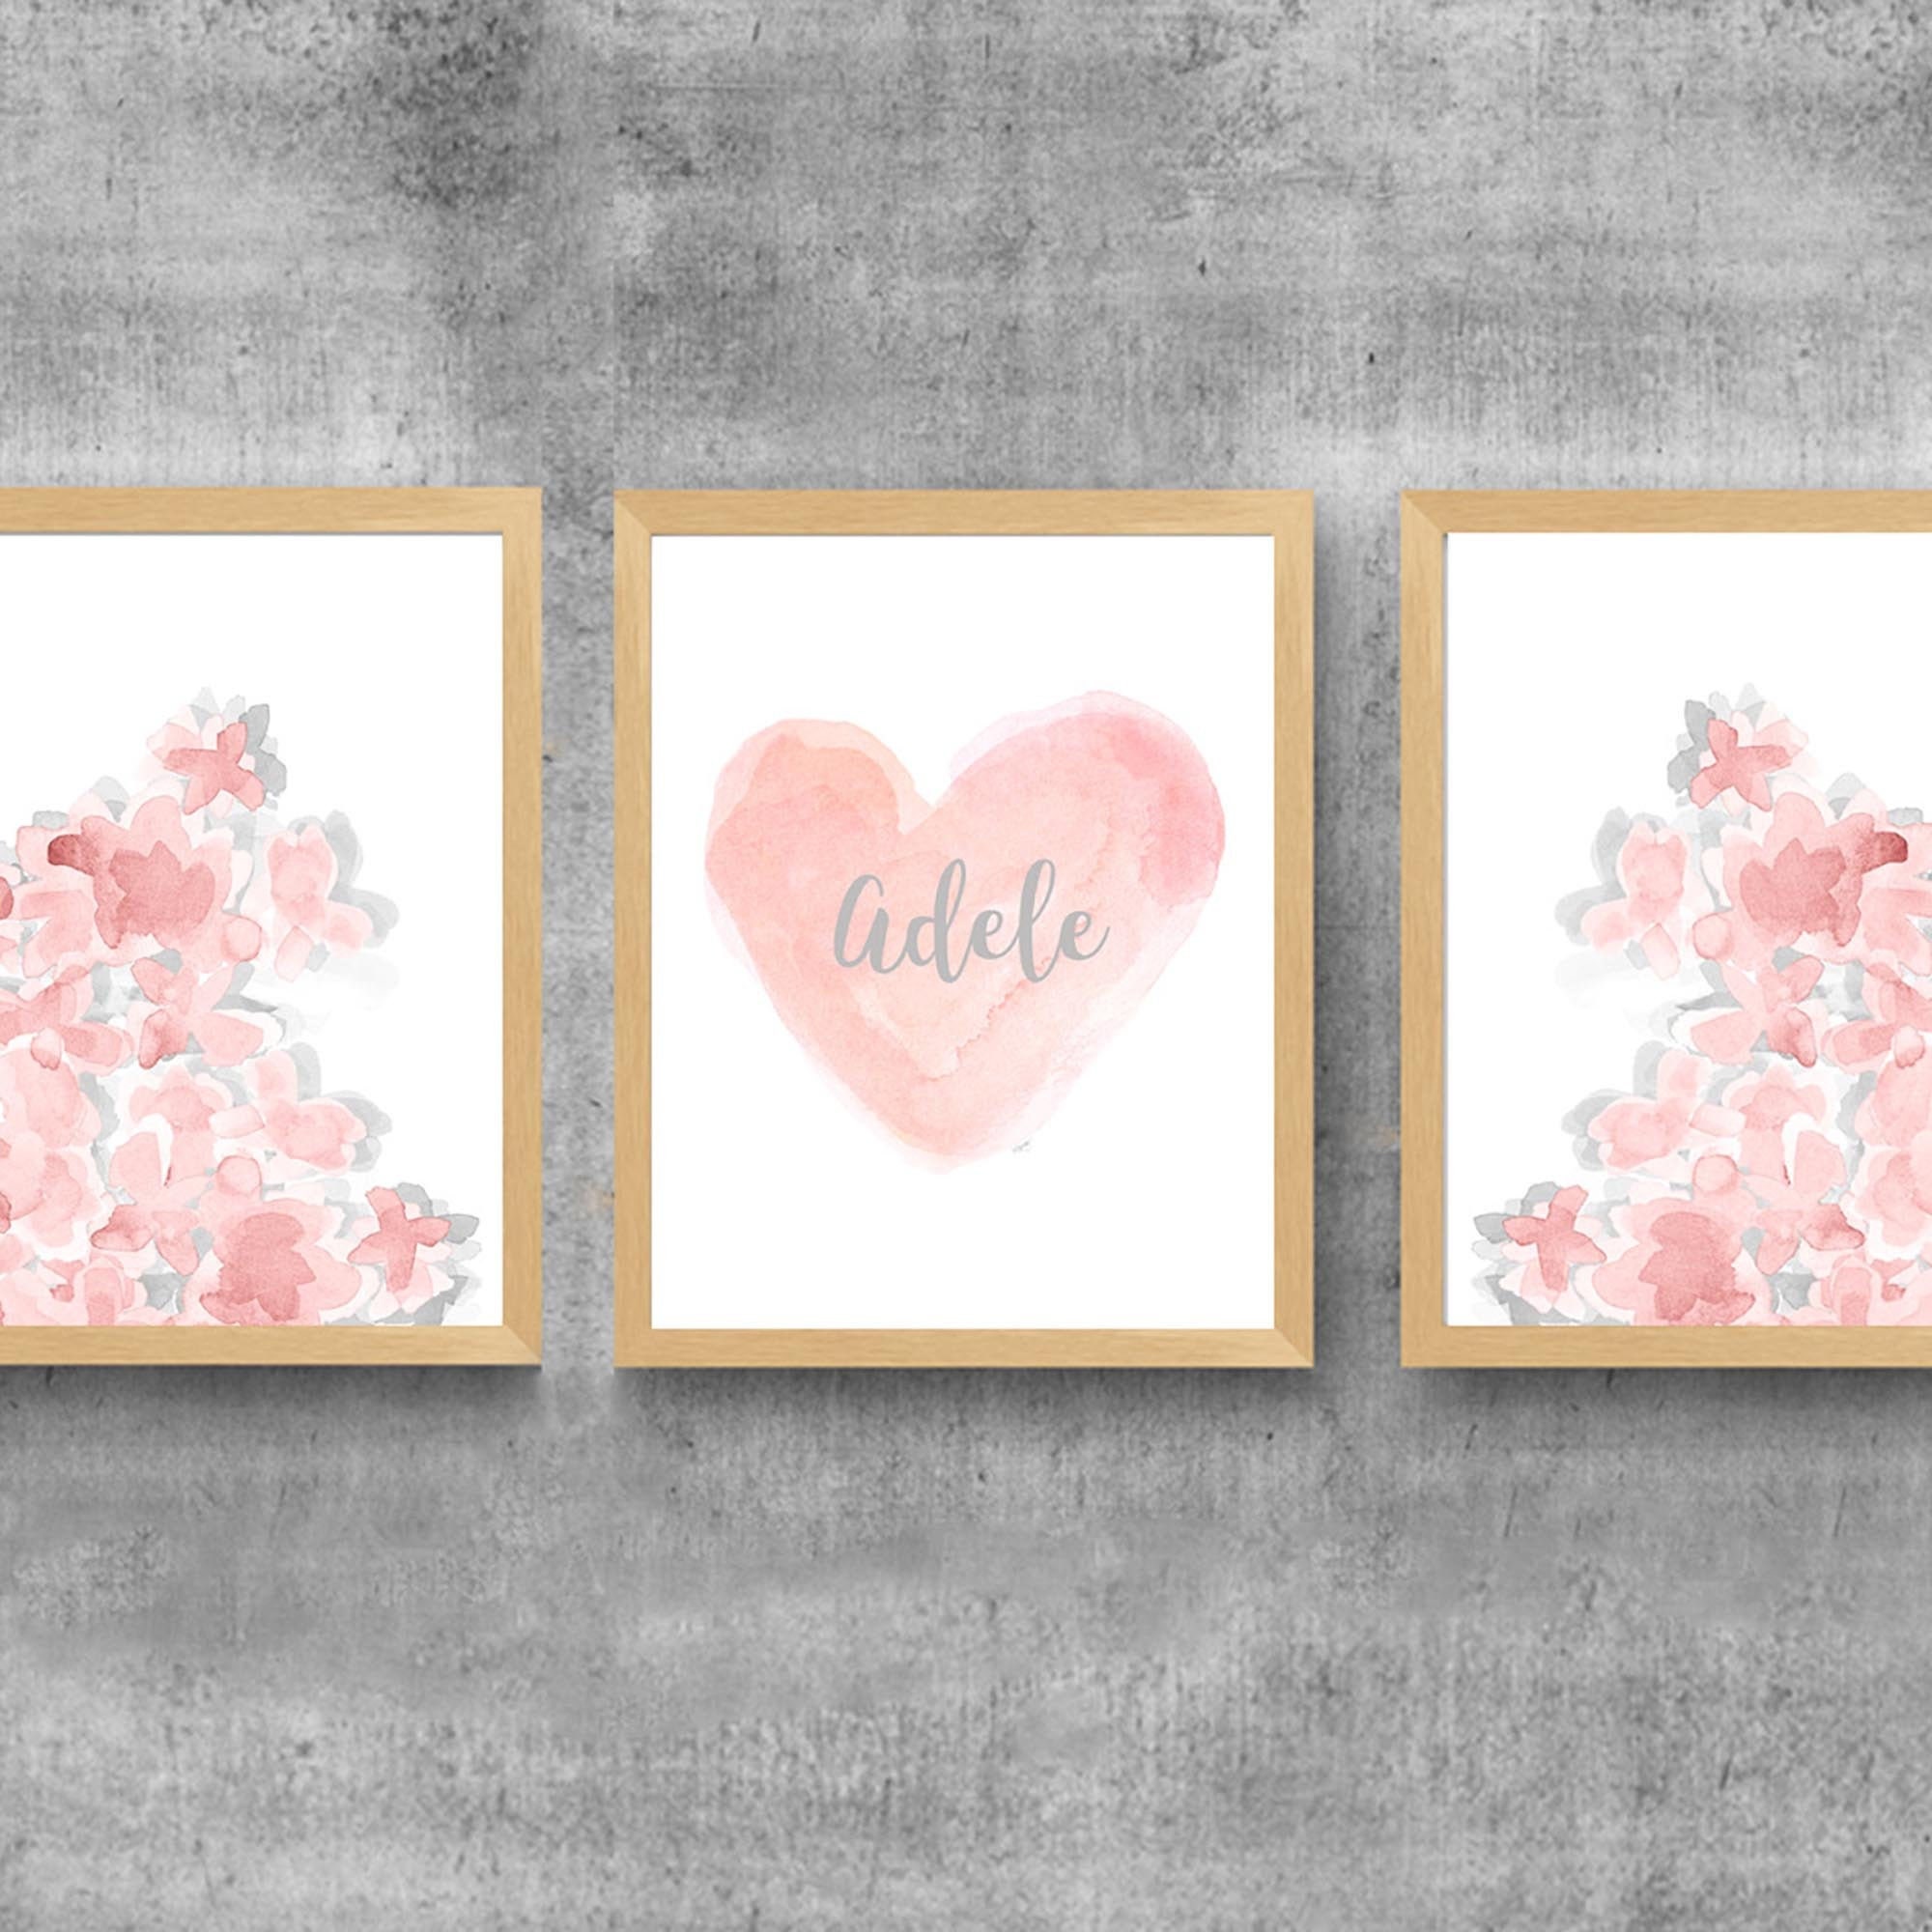 Blush Nursery Art for Baby Girl - Set of 3 Watercolor Paintings